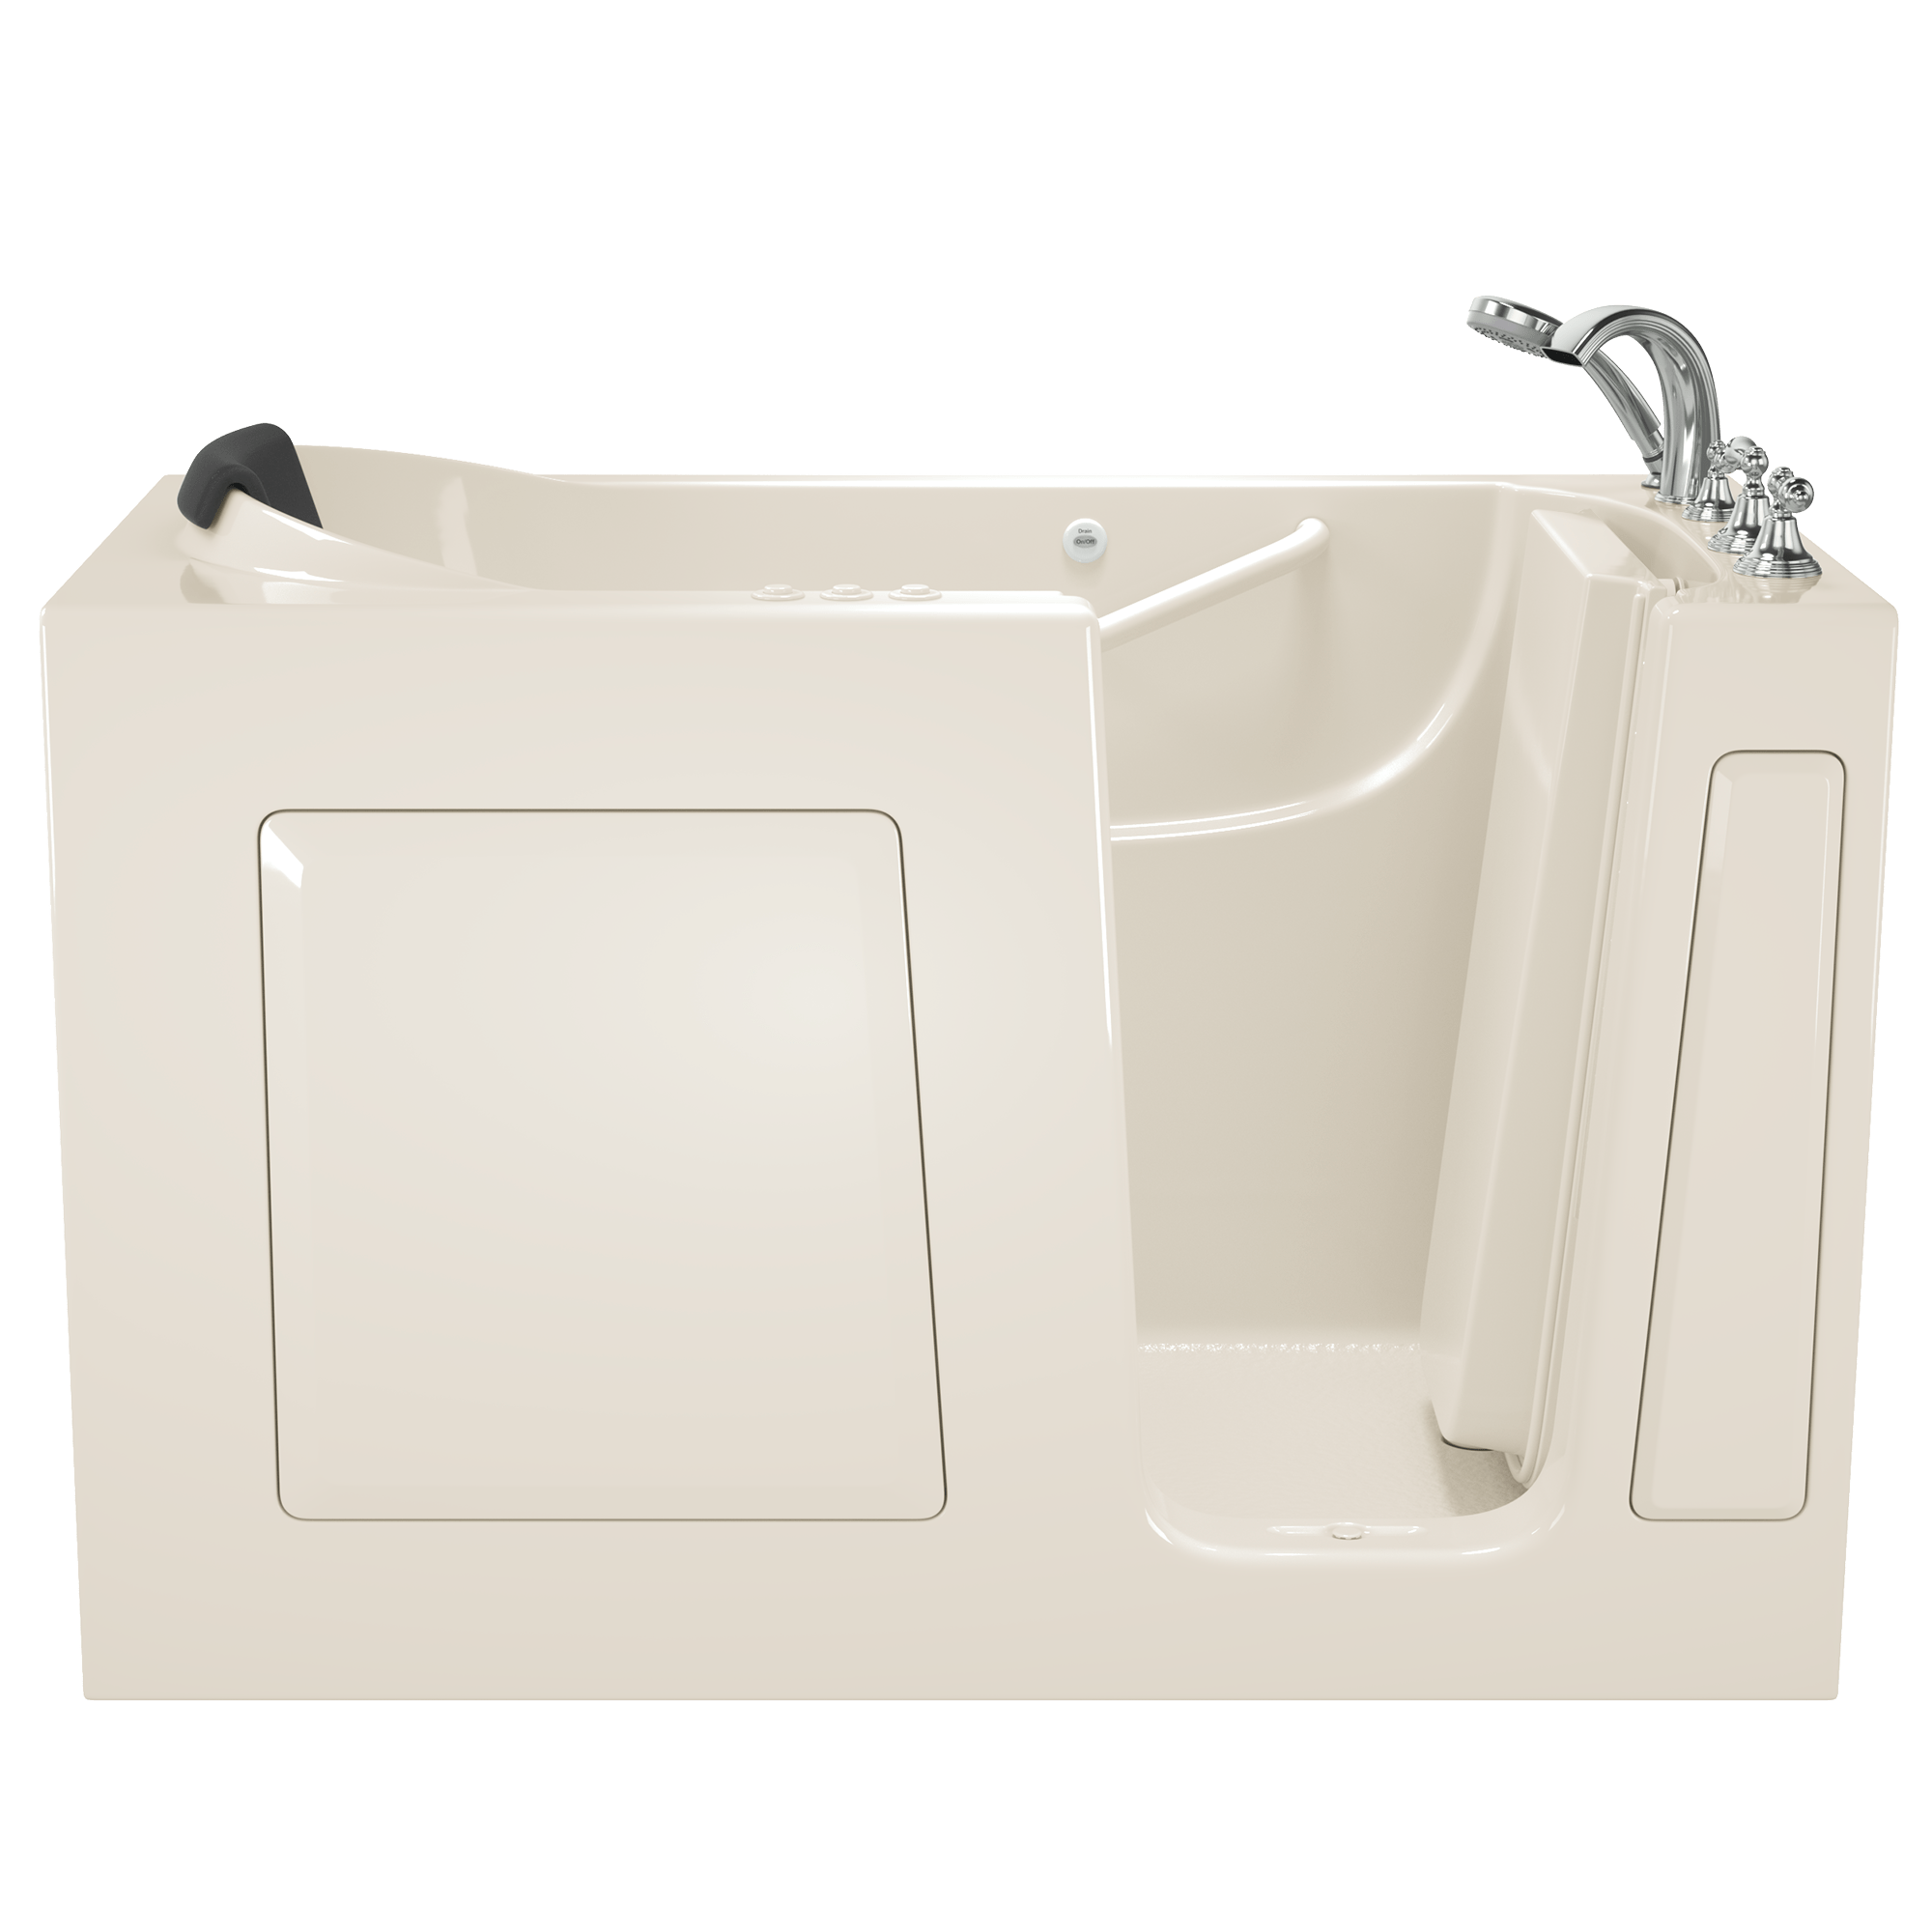 Gelcoat Premium Series 30 x 60  Inch Walk in Tub With Combination Air Spa and Whirlpool Systems   Right Hand Drain With Faucet WIB LINEN